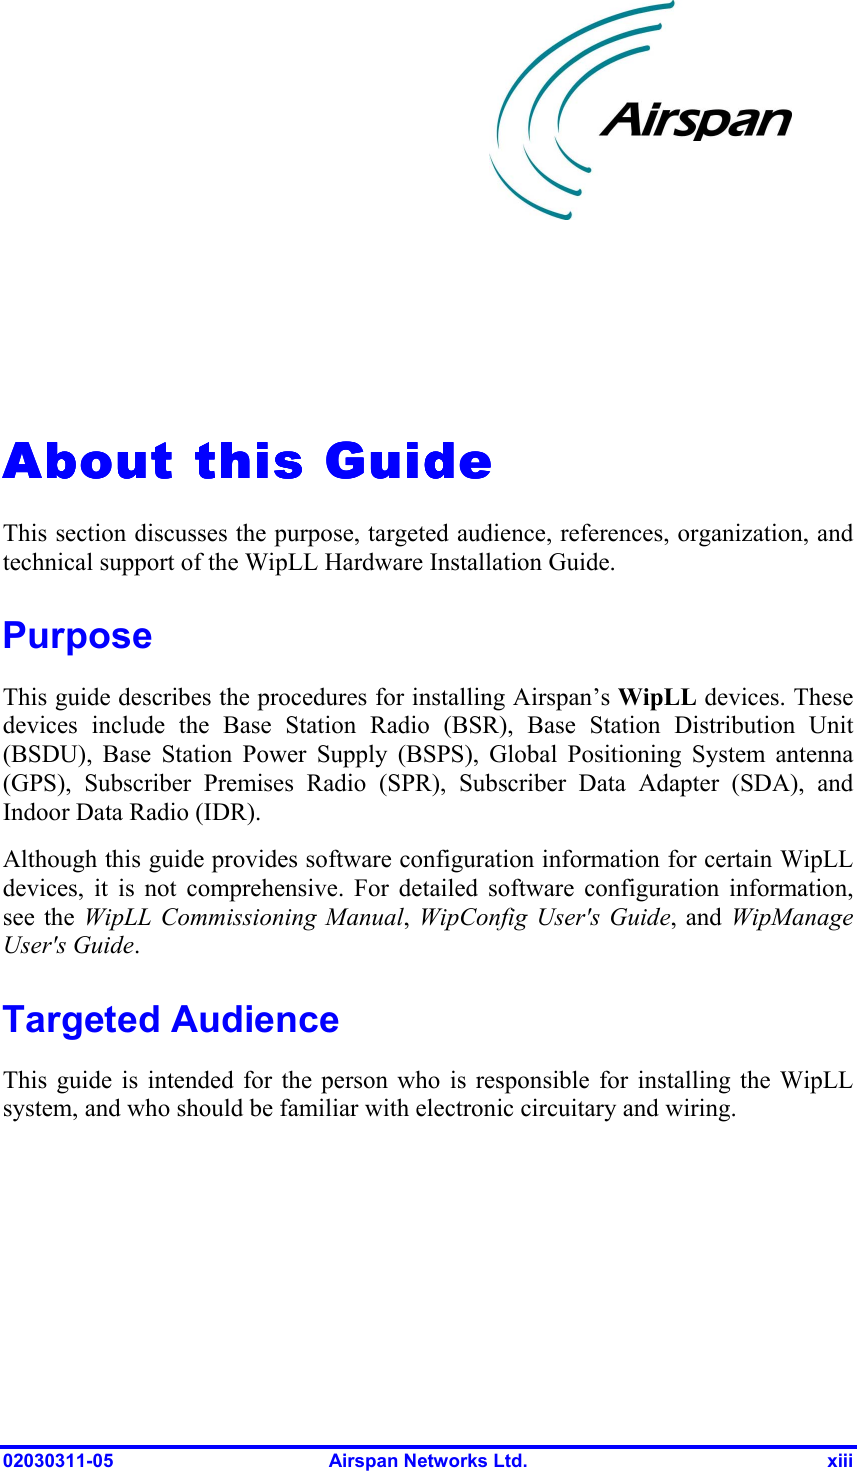  02030311-05  Airspan Networks Ltd.  xiii   About this GuideAbout this GuideAbout this GuideAbout this Guide    This section discusses the purpose, targeted audience, references, organization, and technical support of the WipLL Hardware Installation Guide.  Purpose This guide describes the procedures for installing Airspan’s WipLL devices. These devices include the Base Station Radio (BSR), Base Station Distribution Unit (BSDU), Base Station Power Supply (BSPS), Global Positioning System antenna (GPS), Subscriber Premises Radio (SPR), Subscriber Data Adapter (SDA), and Indoor Data Radio (IDR). Although this guide provides software configuration information for certain WipLL devices, it is not comprehensive. For detailed software configuration information, see the WipLL Commissioning Manual,  WipConfig User&apos;s Guide, and WipManage User&apos;s Guide. Targeted Audience This guide is intended for the person who is responsible for installing the WipLL system, and who should be familiar with electronic circuitary and wiring.  